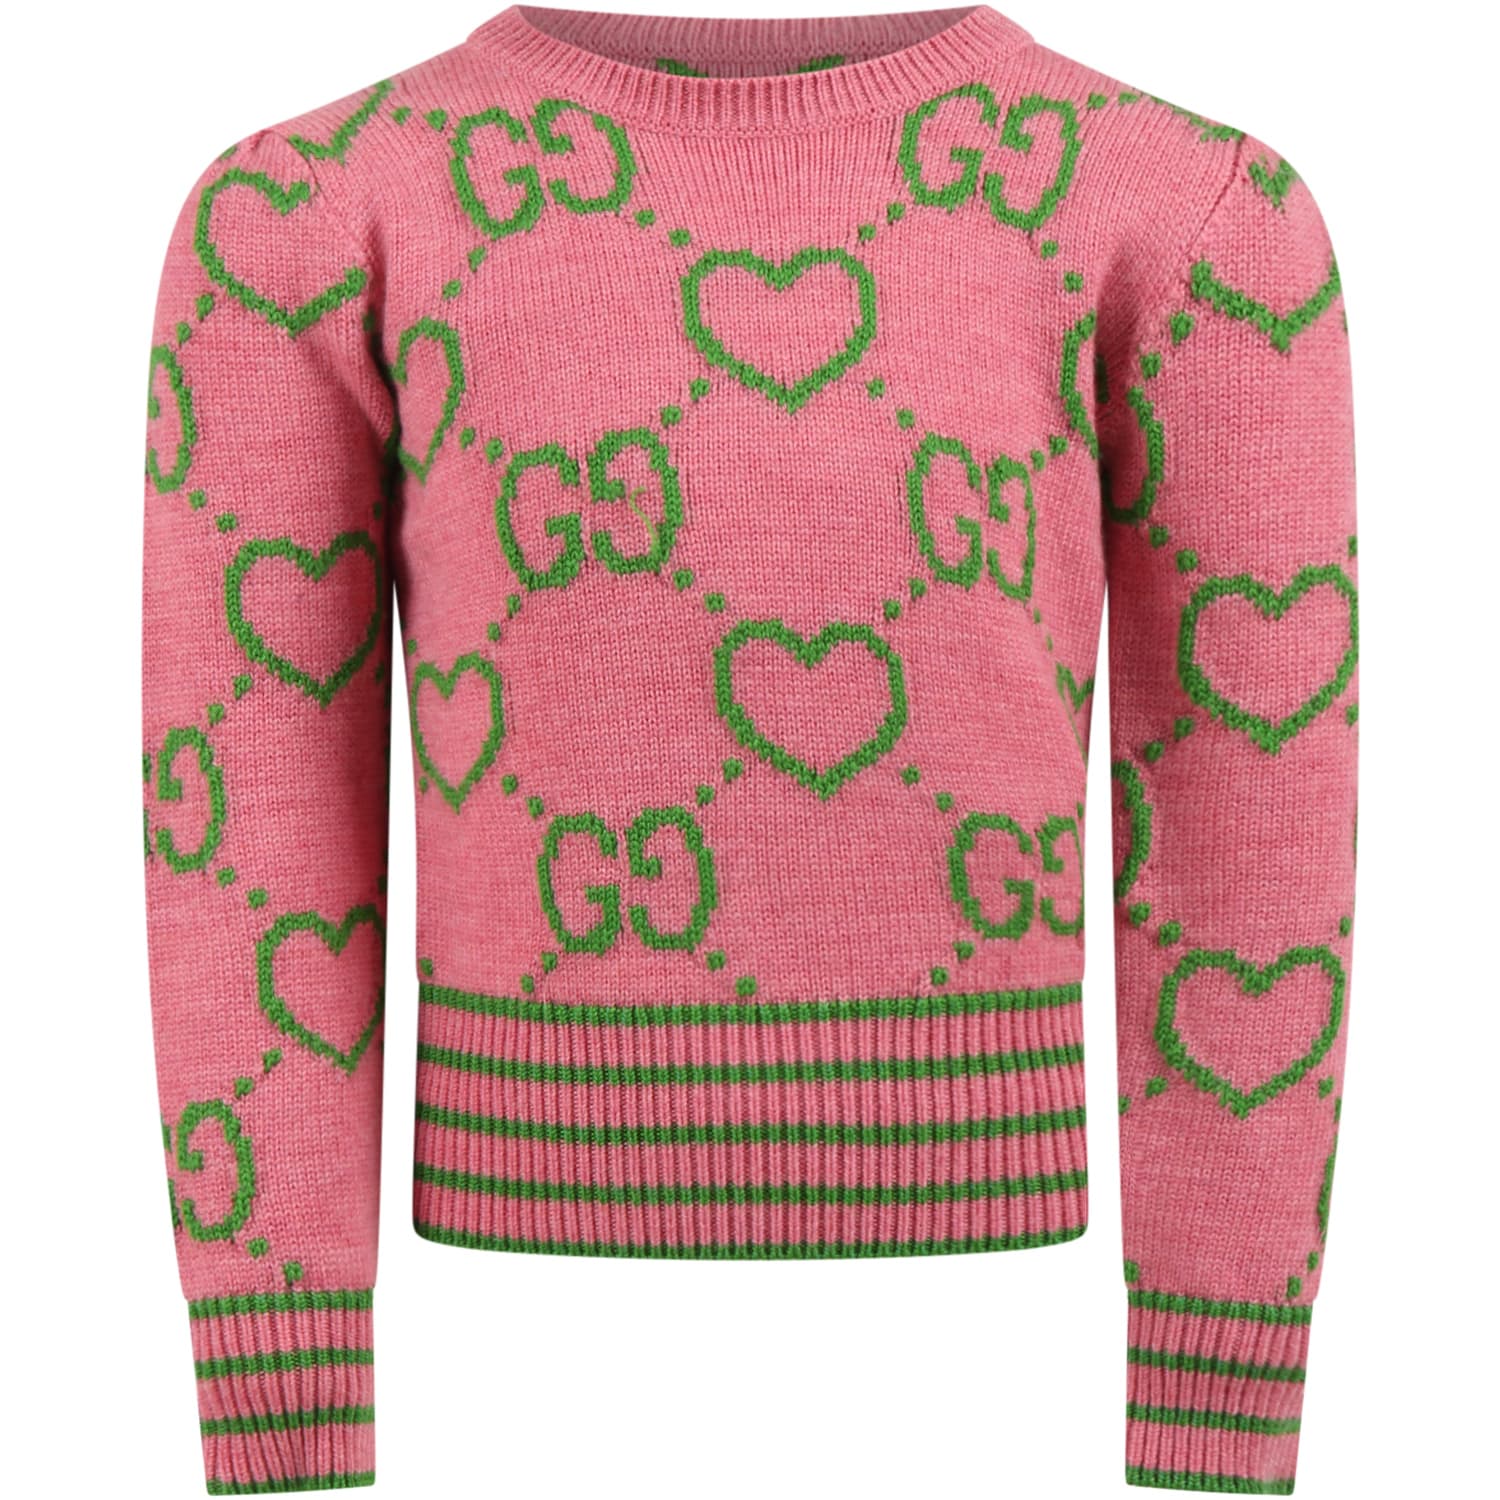 Gucci Pink Sweater For Girl With Iconic Green Gg